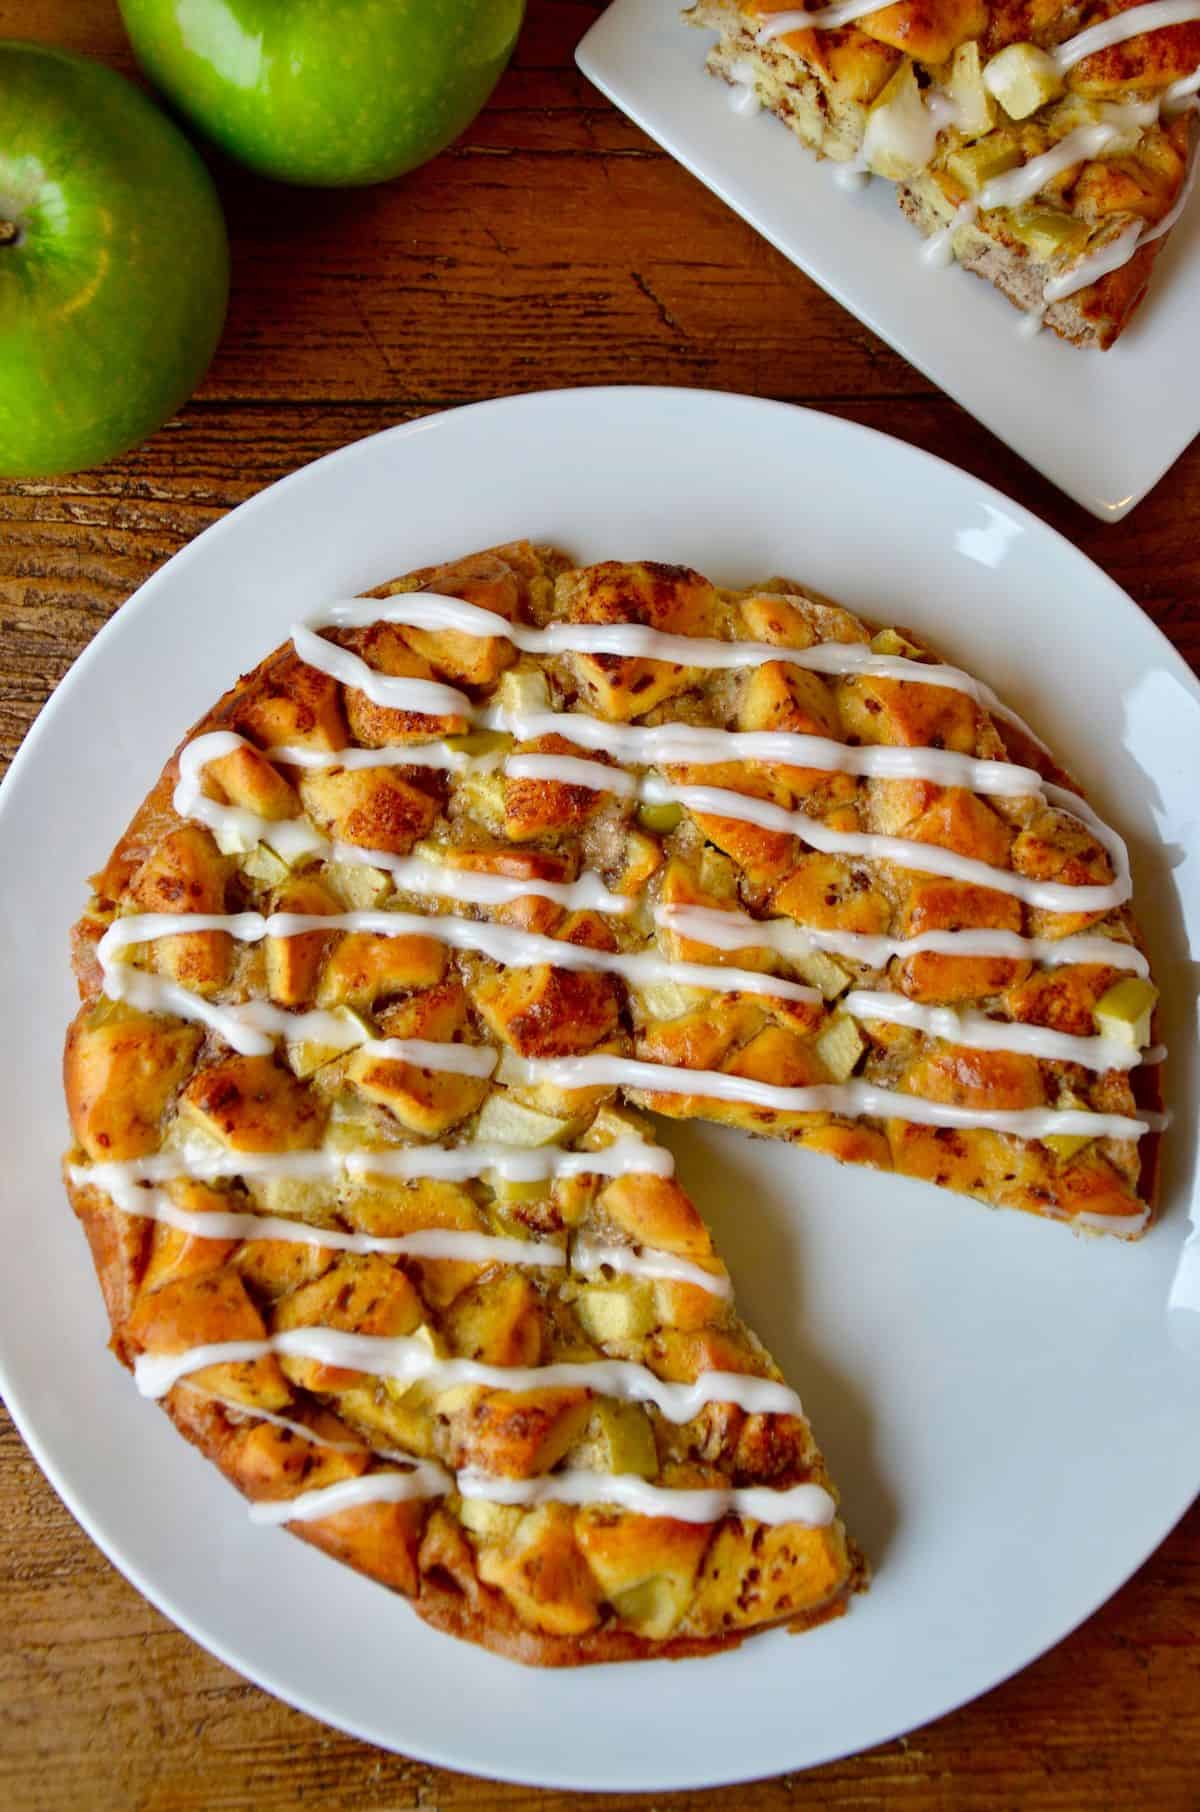 An icing-drizzled Apple Cinnamon Roll Bake is on a white plate, with a wedge missing. In the background are a couple of Granny Smith apples.